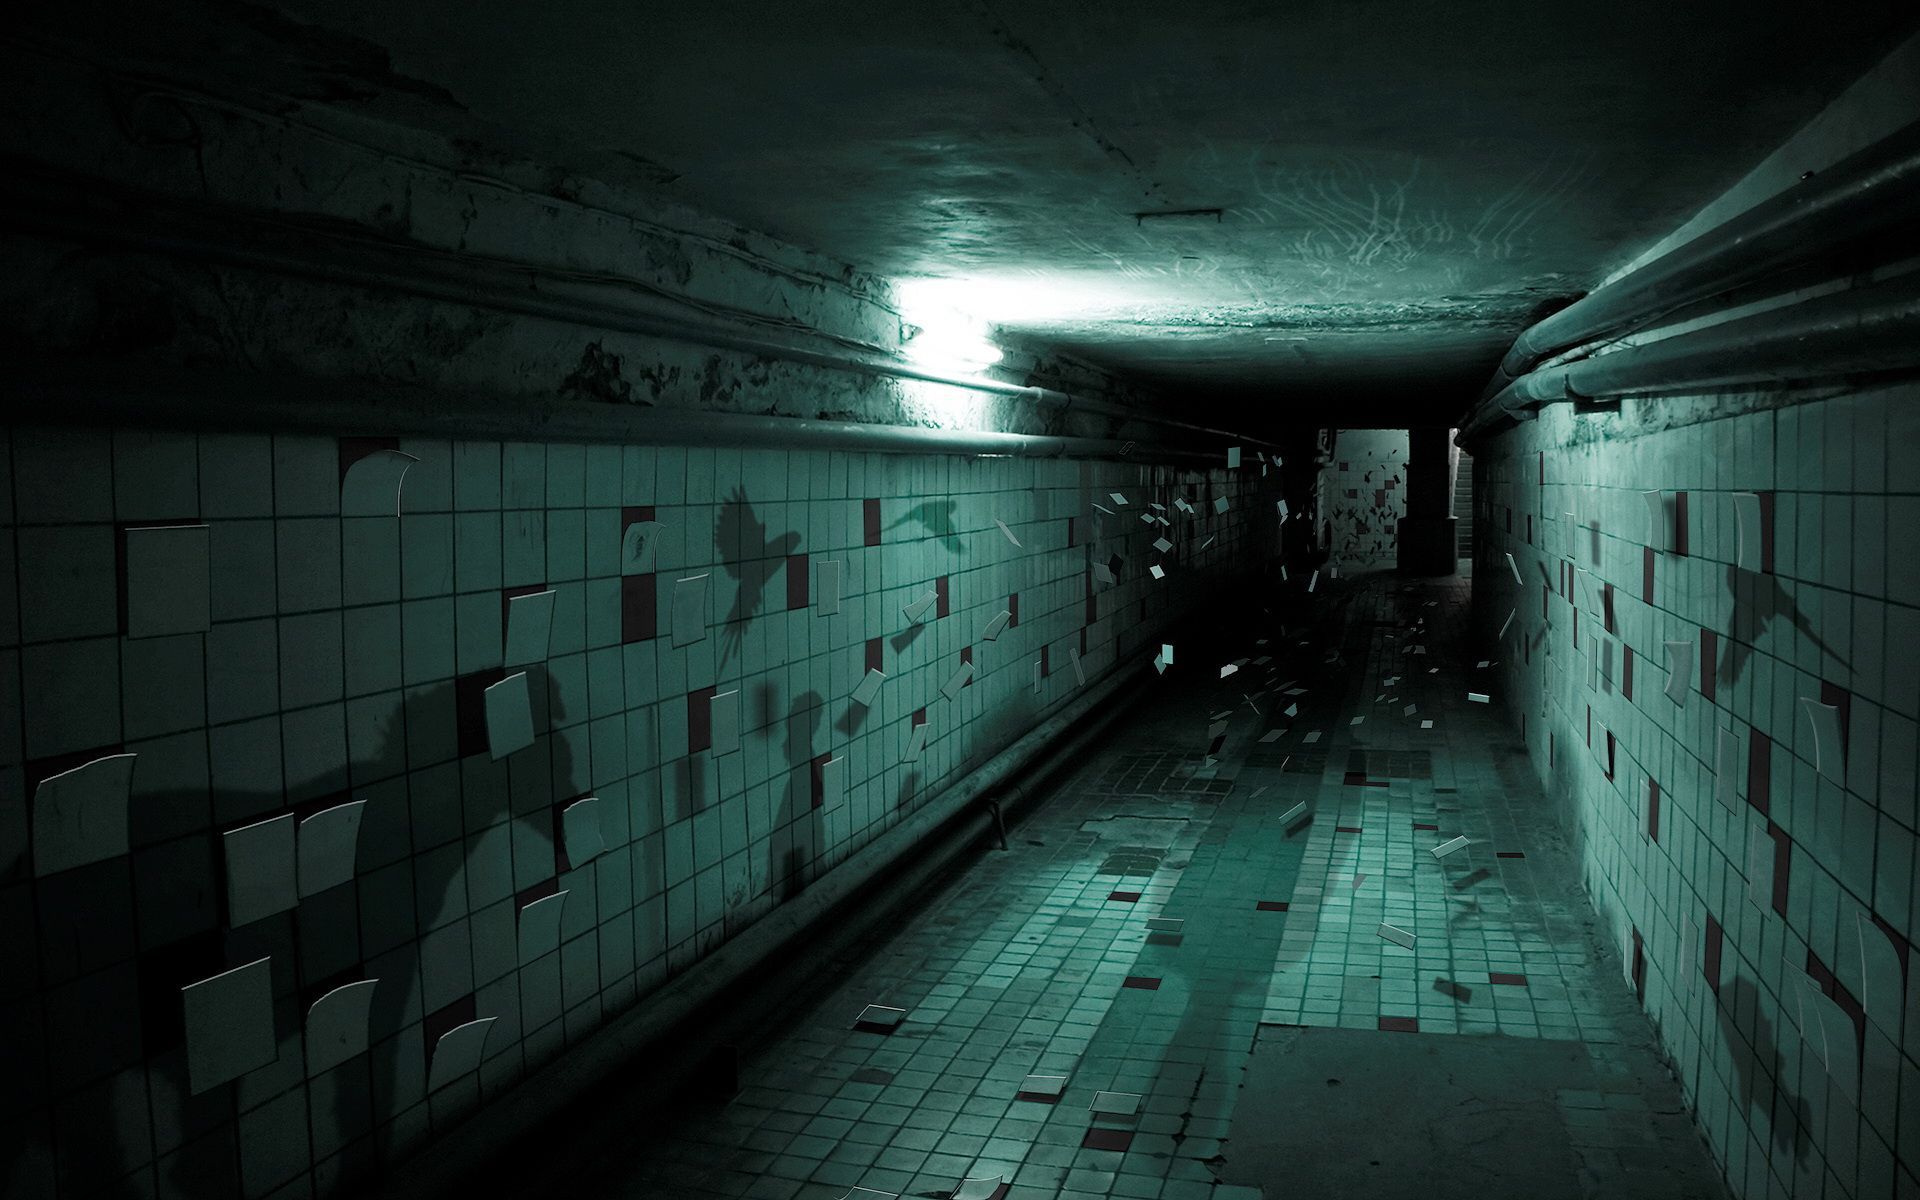 855 Creepy HD Wallpapers | Backgrounds - Wallpaper Abyss